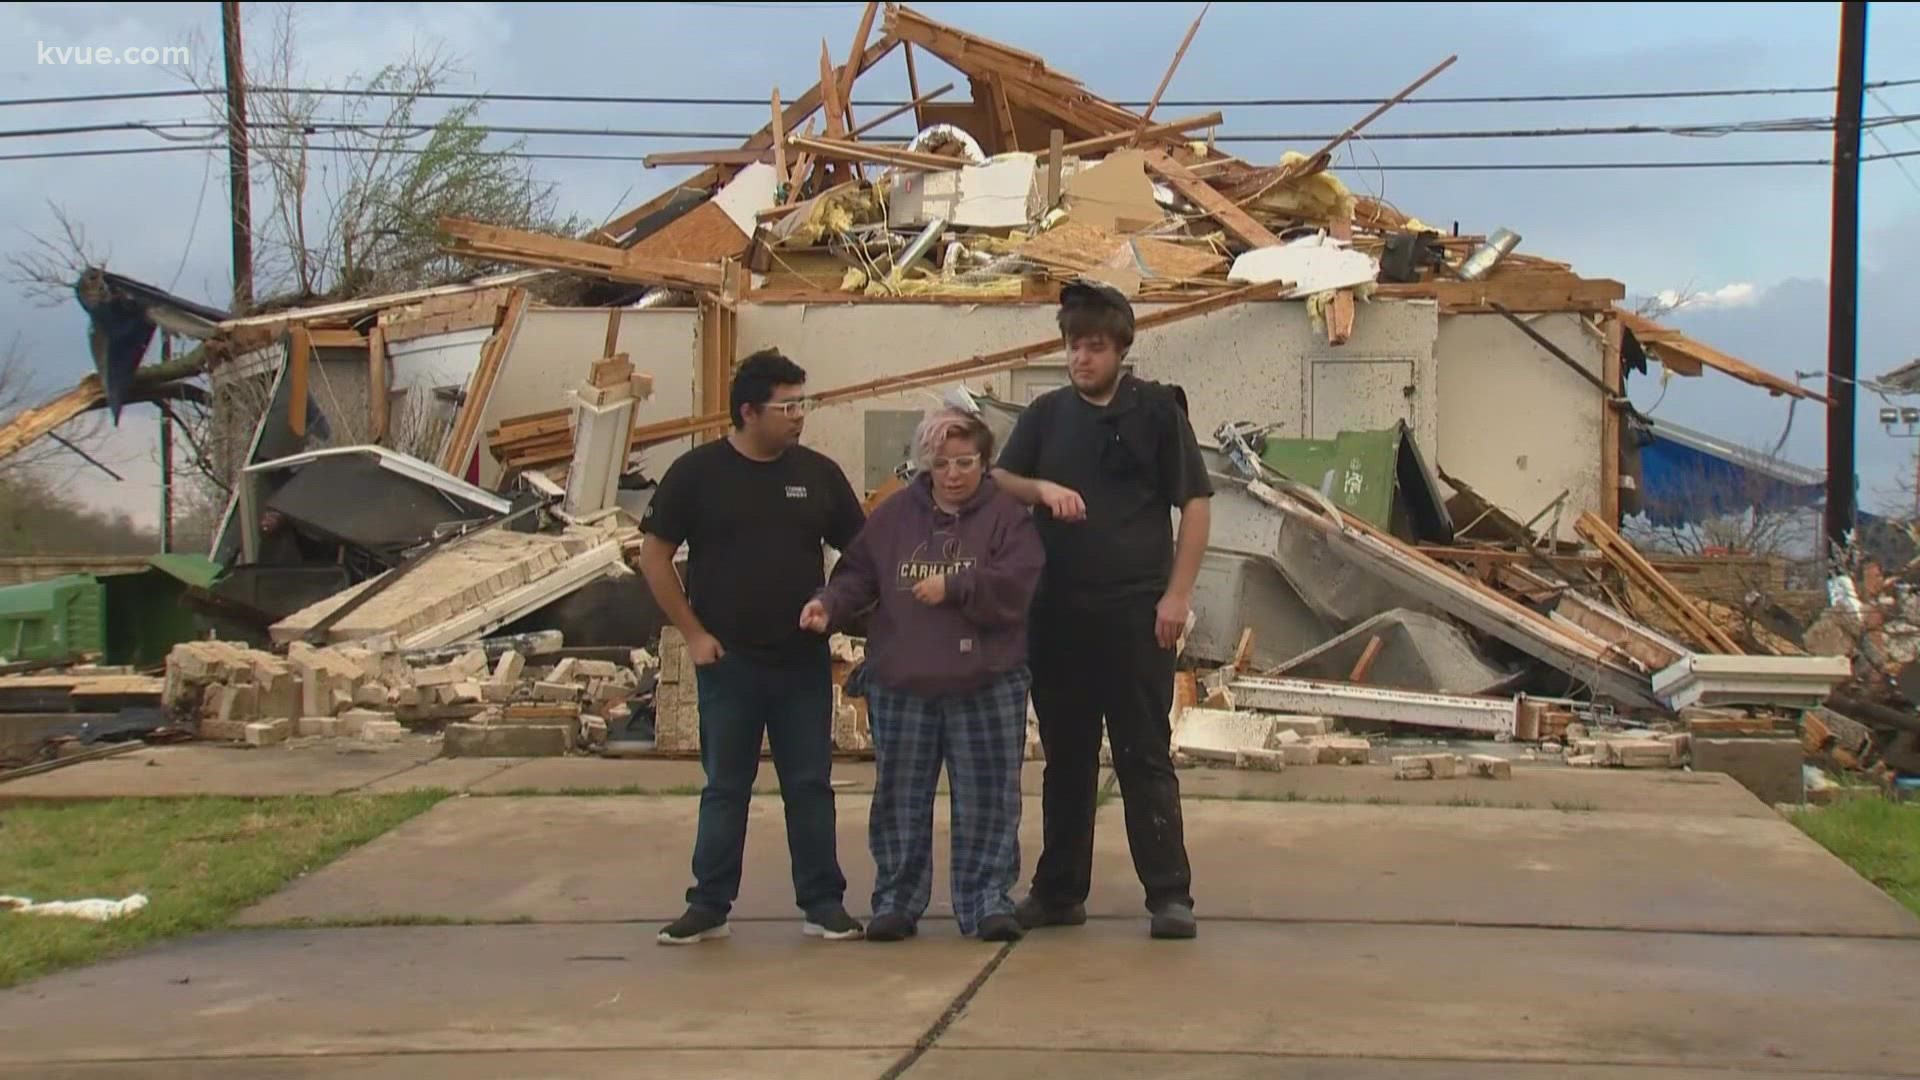 One woman is giving thanks to those who helped pull her from the rubble of her own home.